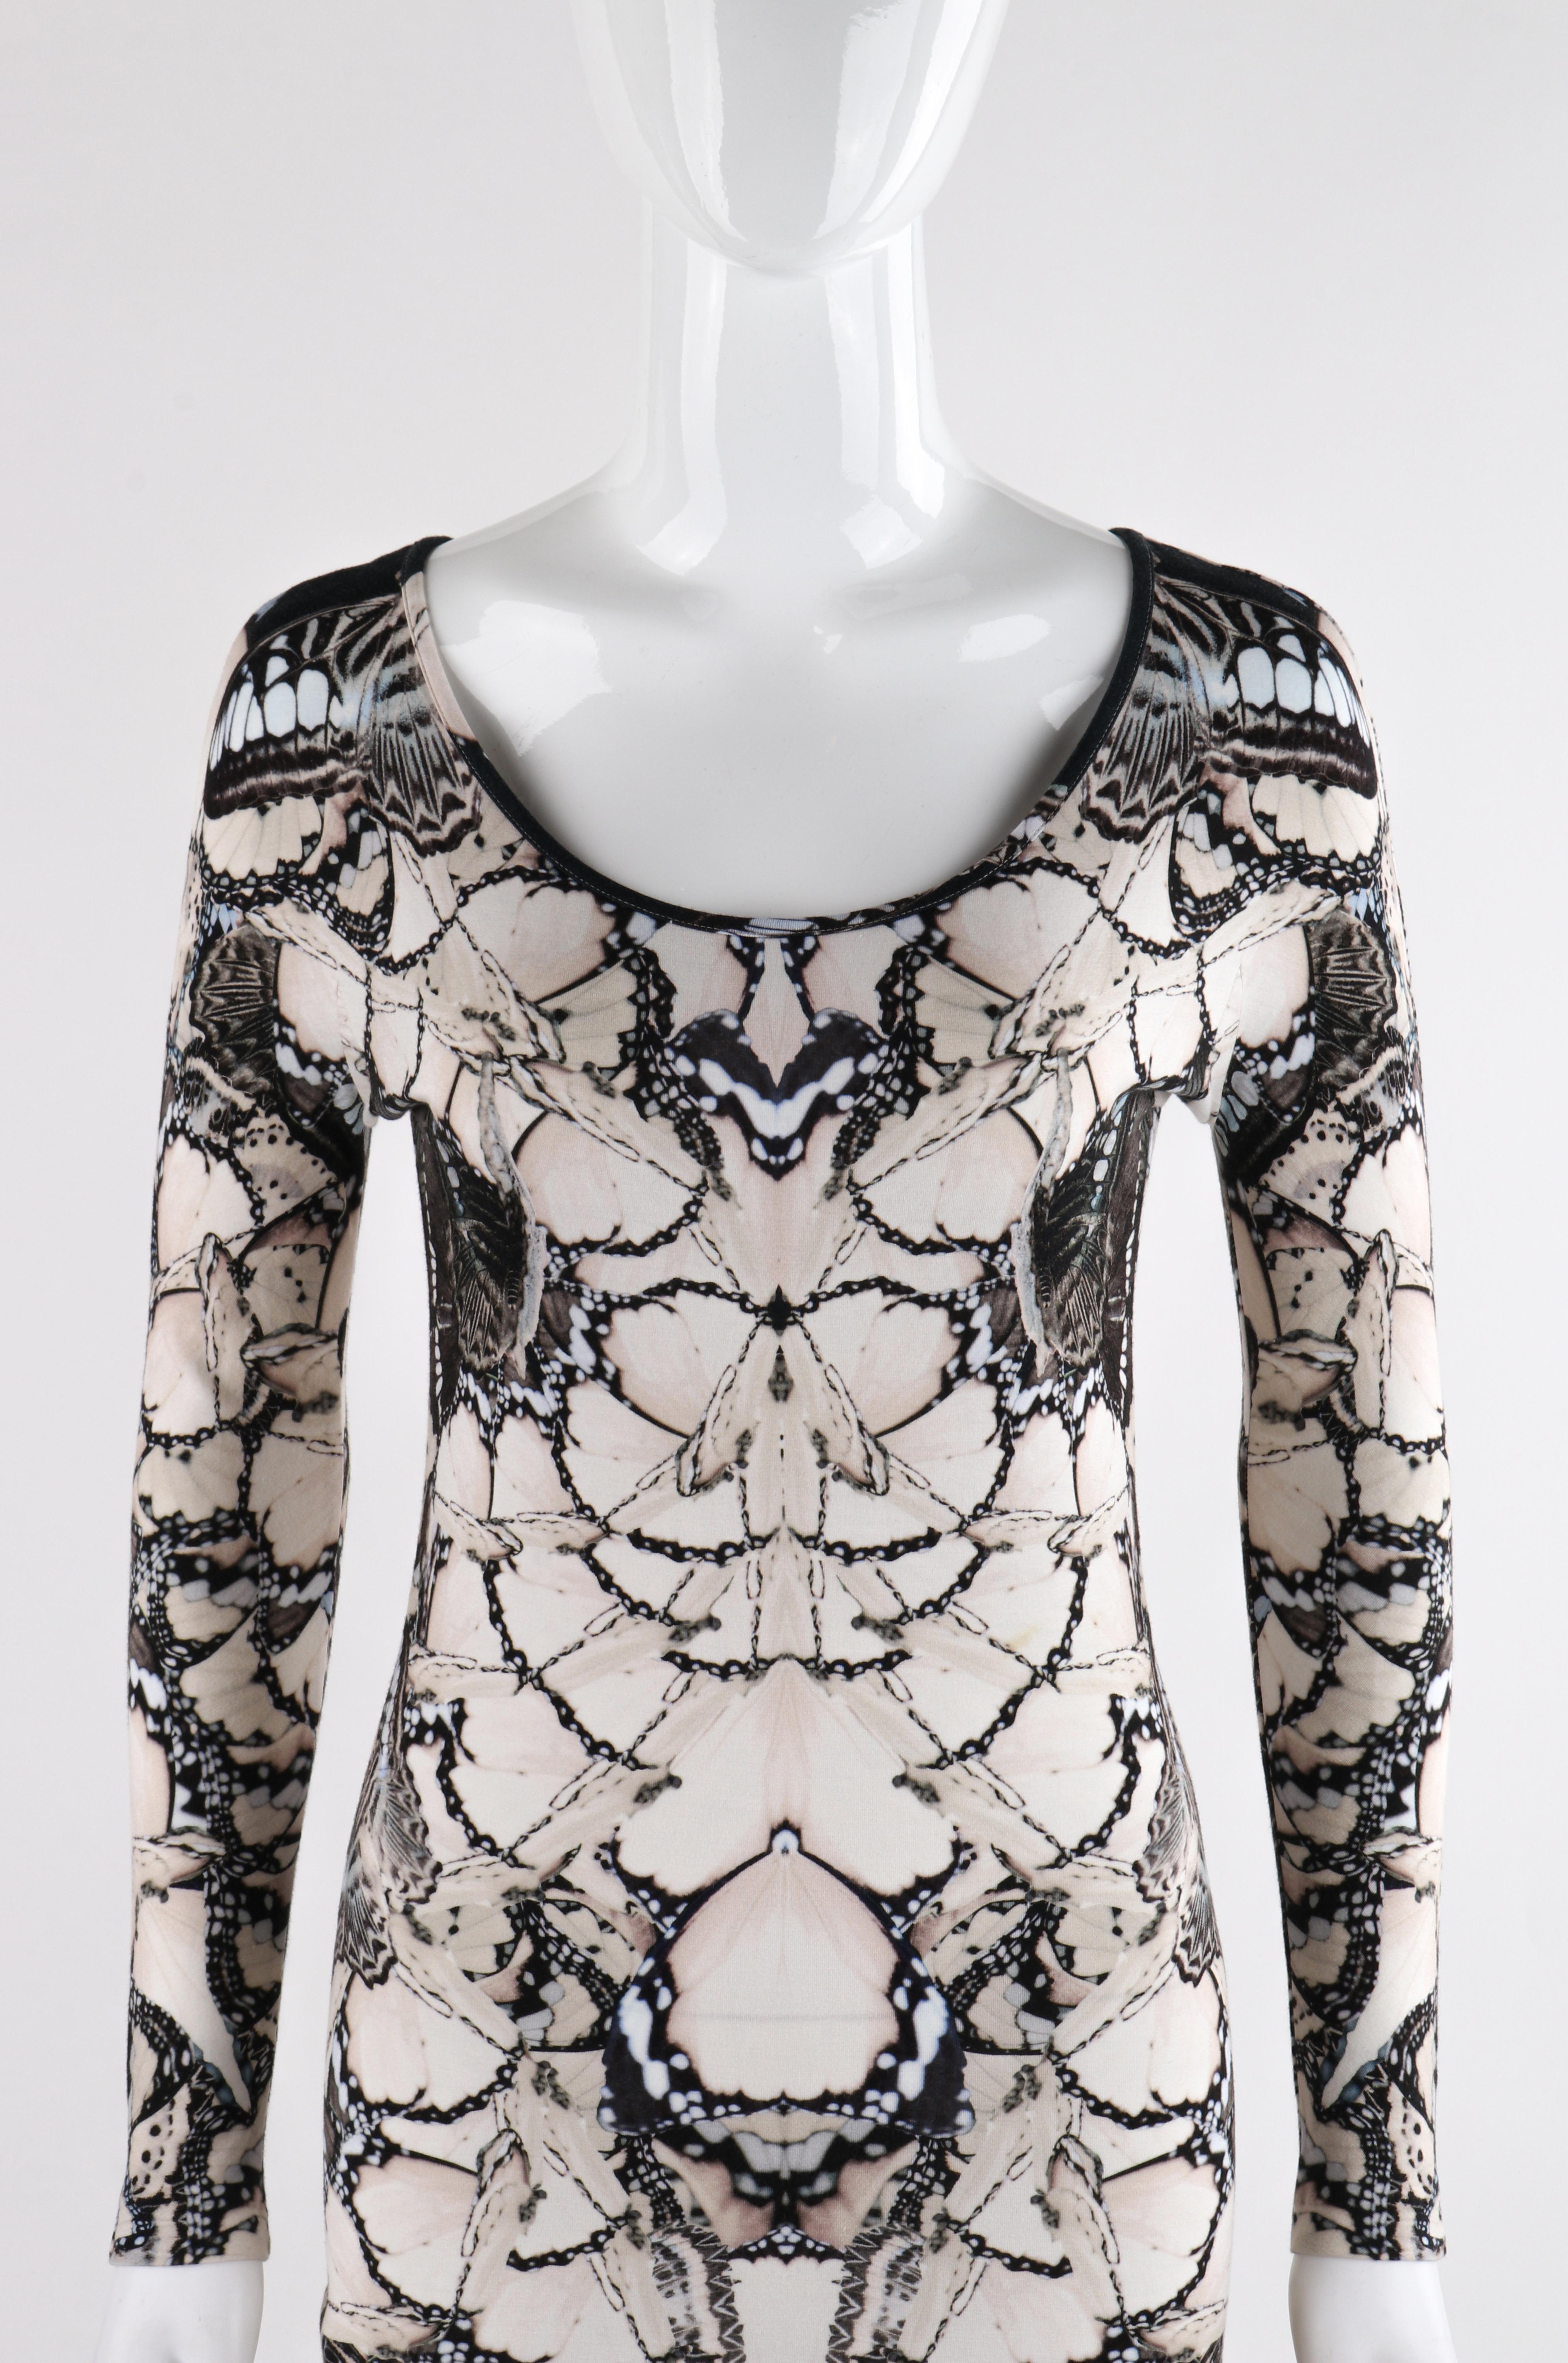 ALEXANDER McQUEEN S/S 2011 Black White Cream Butterfly Print Knit Sheath Dress

Brand / Manufacturer: Alexander McQueen
Collection: S/S 2011
Designer: Sarah Burton
Style: Knit sheath dress; long sleeves
Color(s): Shades of black, white, and off